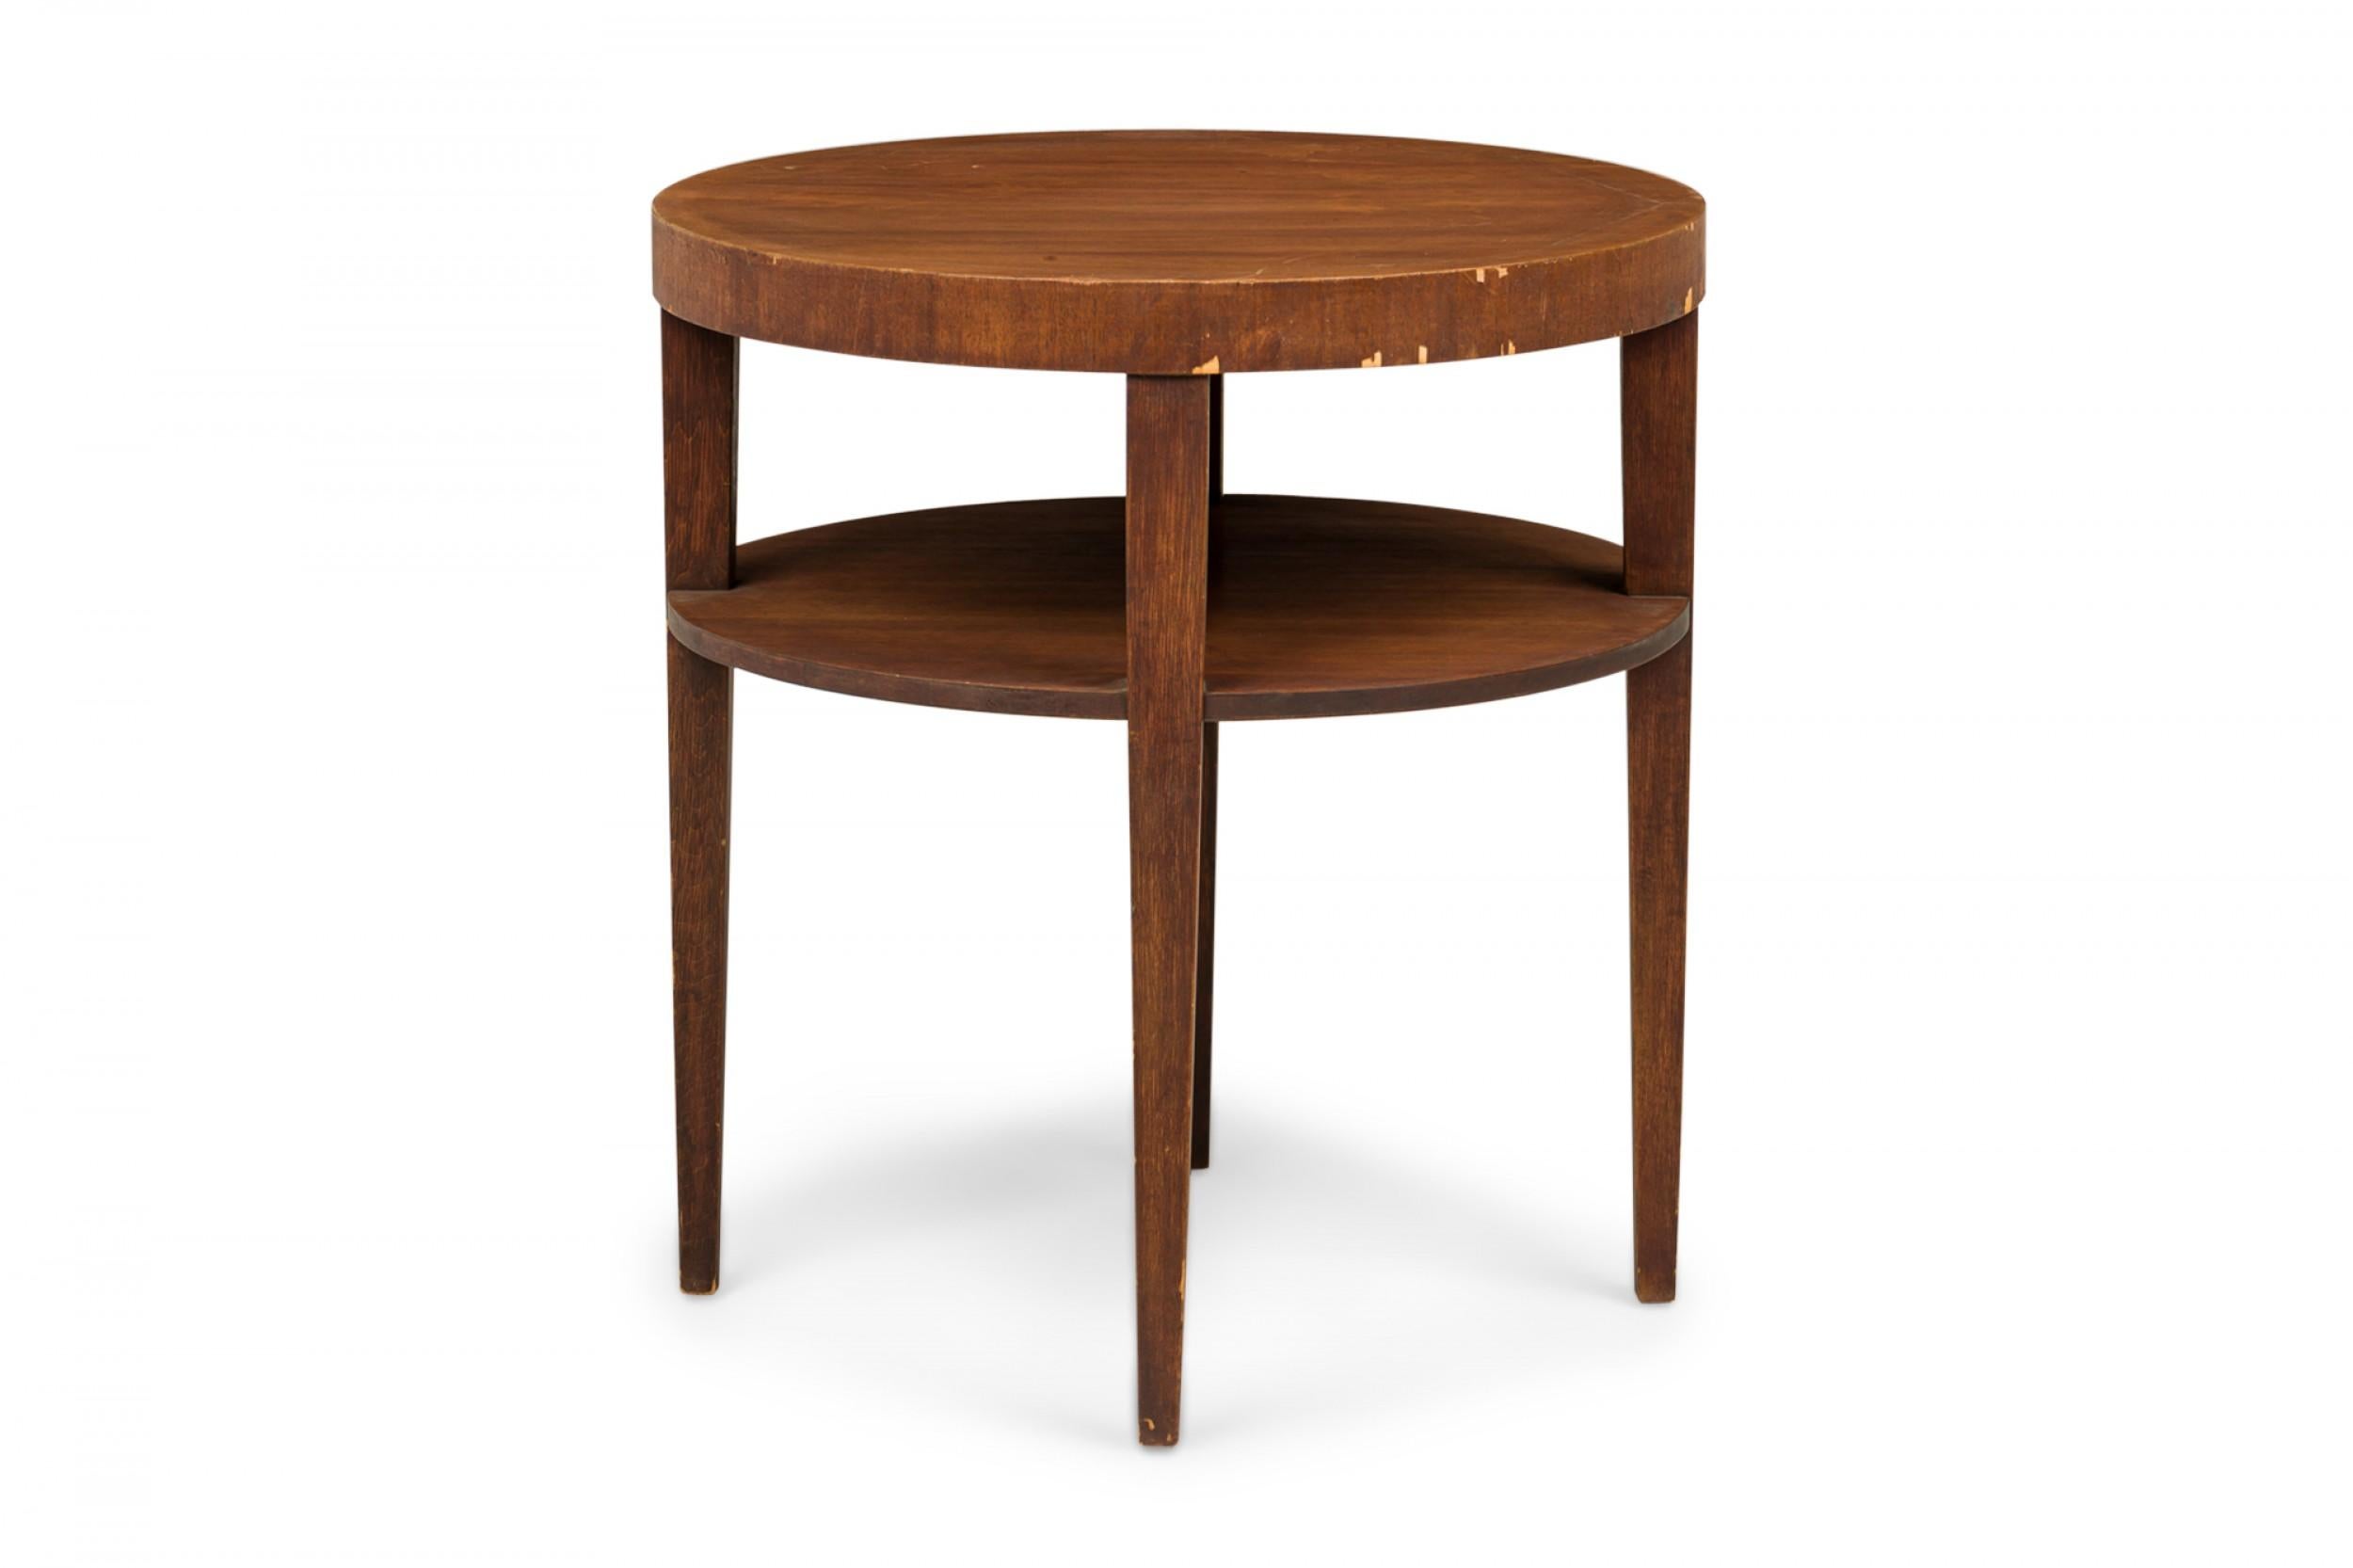 Mid-Century circular two-tier end / side table with a circular top and lower shelf, supported by four tapered square legs, finished in walnut veneer. (T.H. ROBSJOHN-GIBBINGS)
